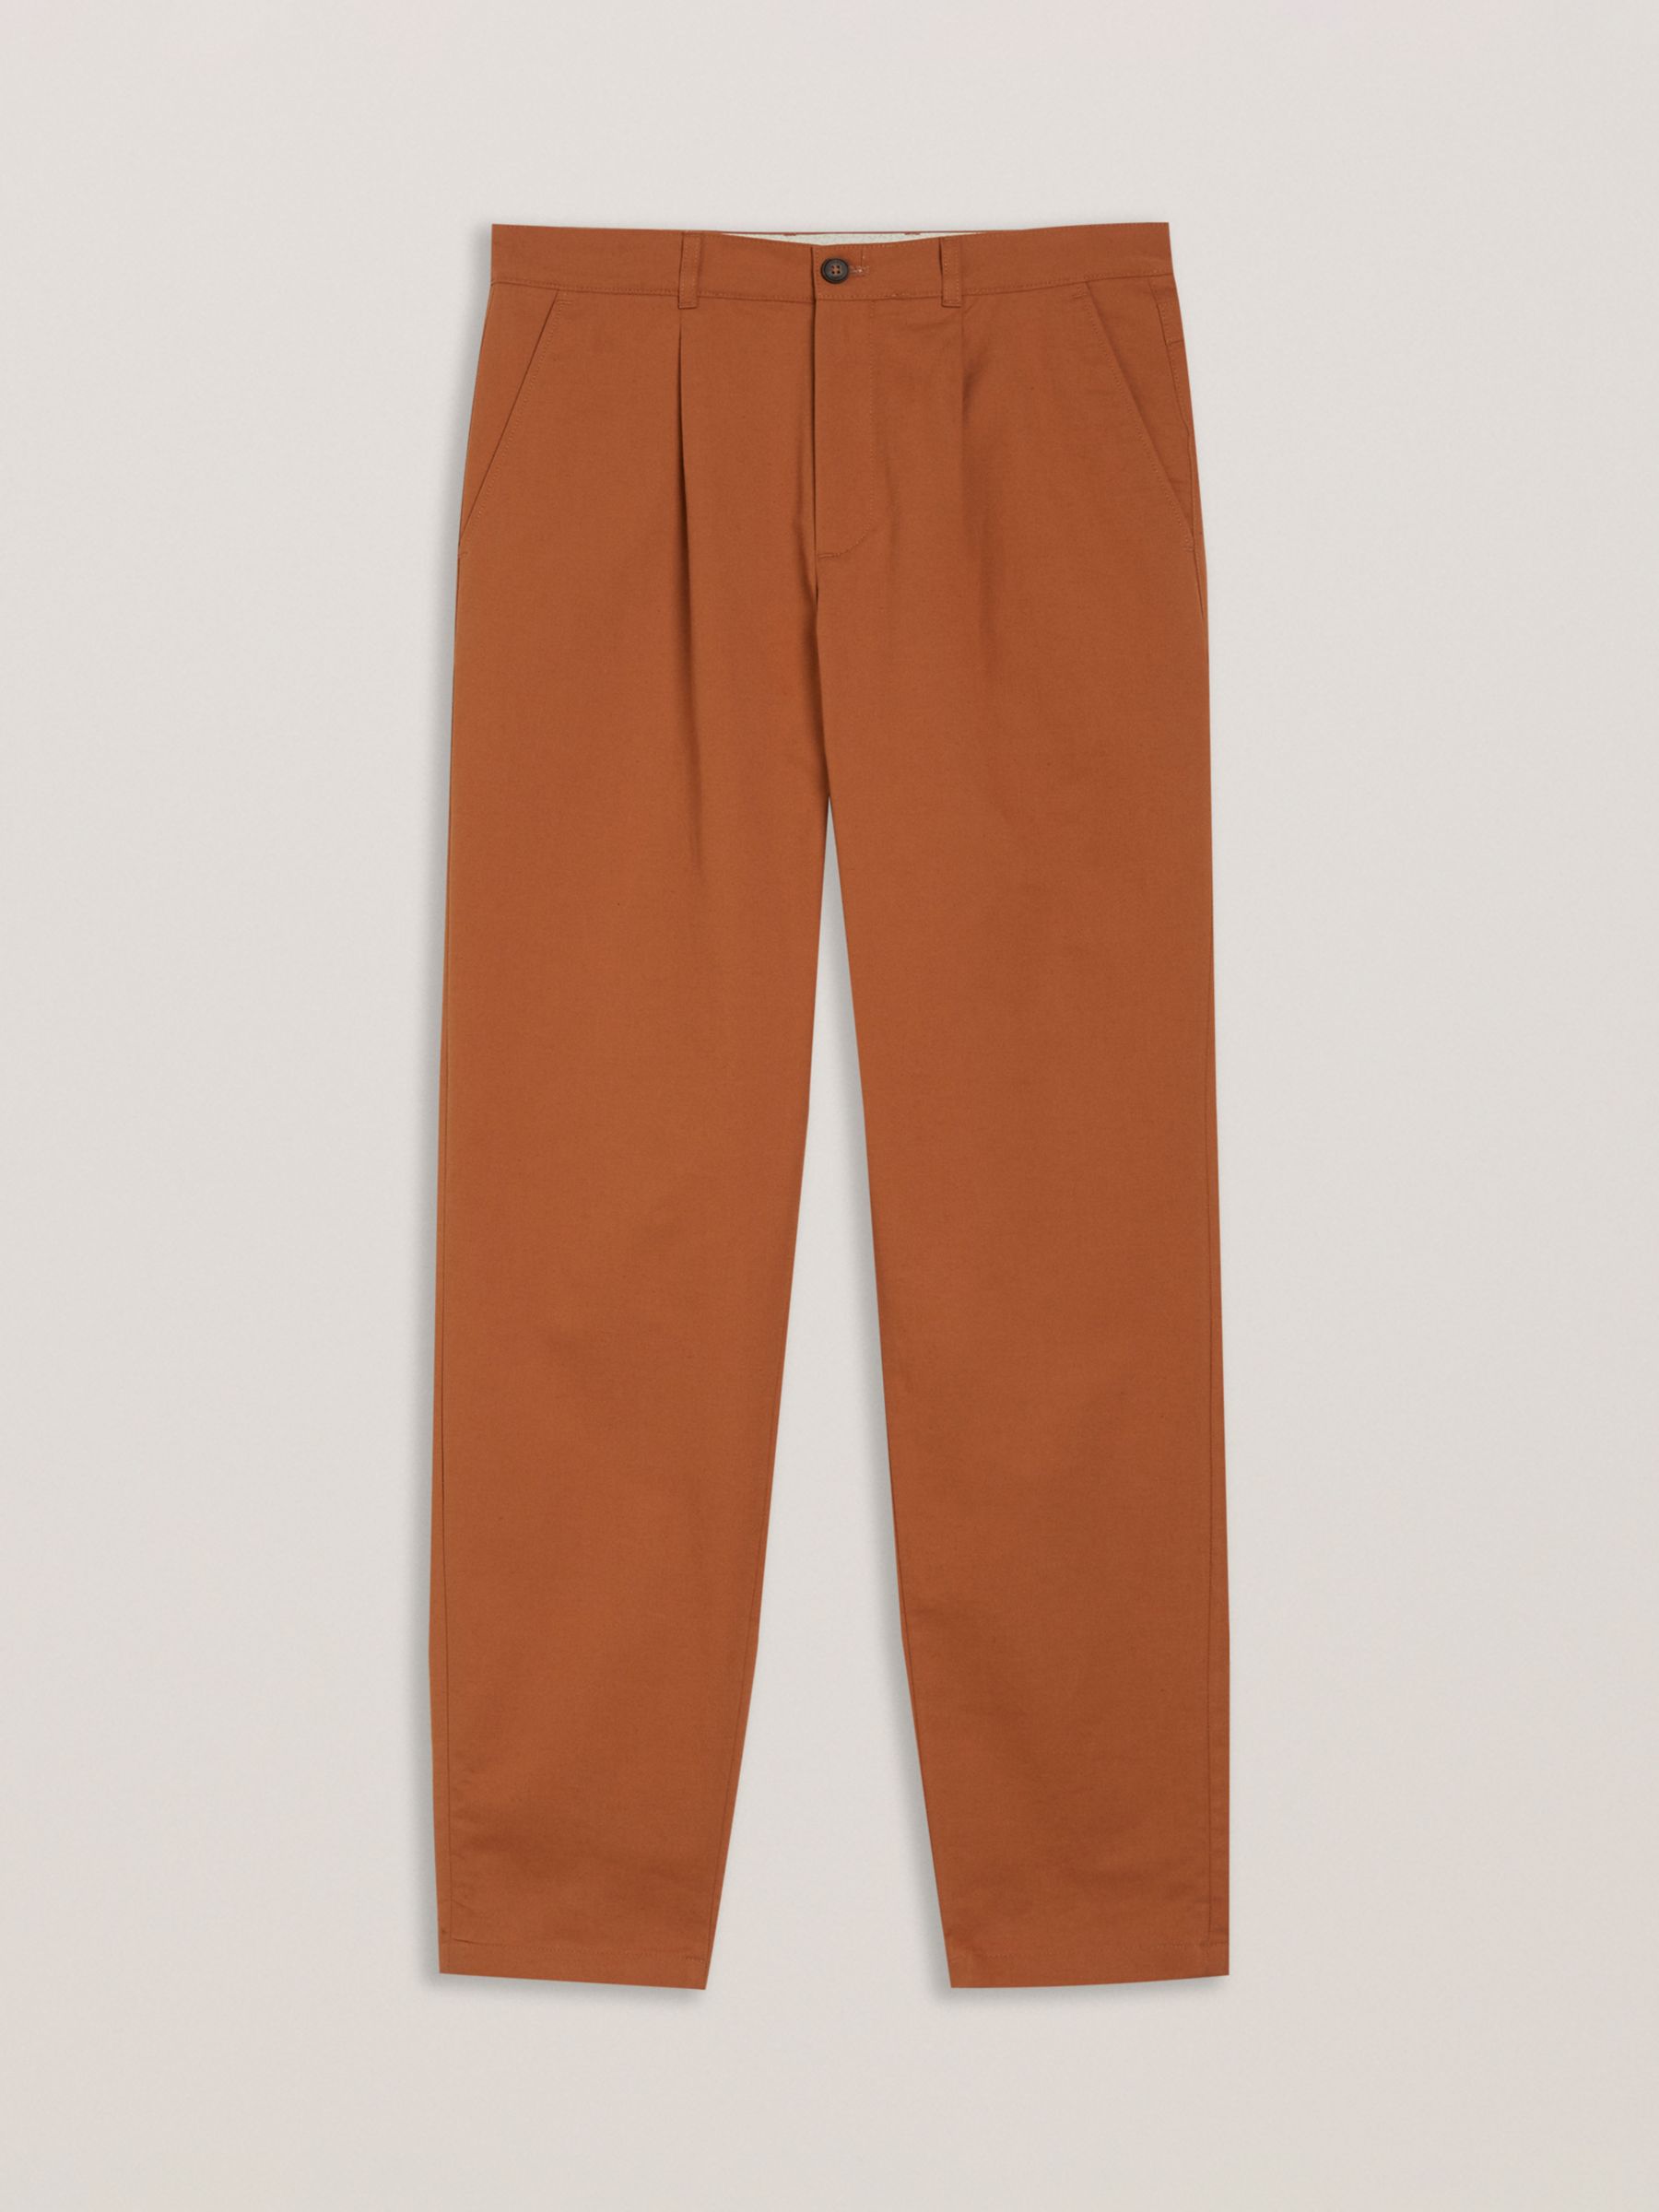 Ted Baker Holmer Single Pleat Tapered Fit Trousers, Brown Mid, 38R